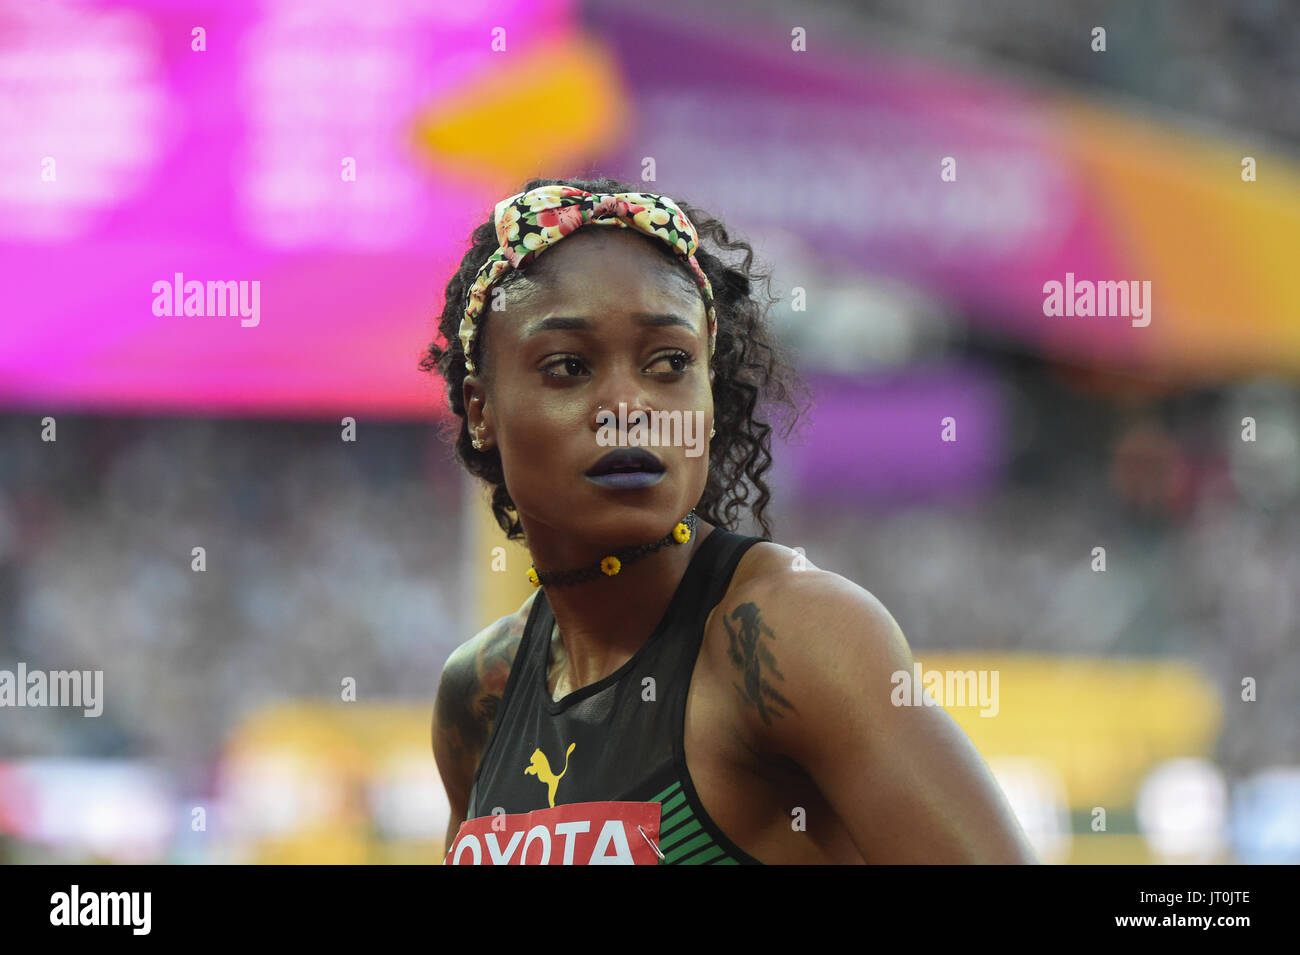 London, UK. 6th Aug, 2017. Elaine THOMPSON, Jamaica, after 100 meter semifinal in London on August 6, 2017 at the 2017 IAAF World Championships athletics. Credit: Ulrik Pedersen/Alamy Live News Stock Photo